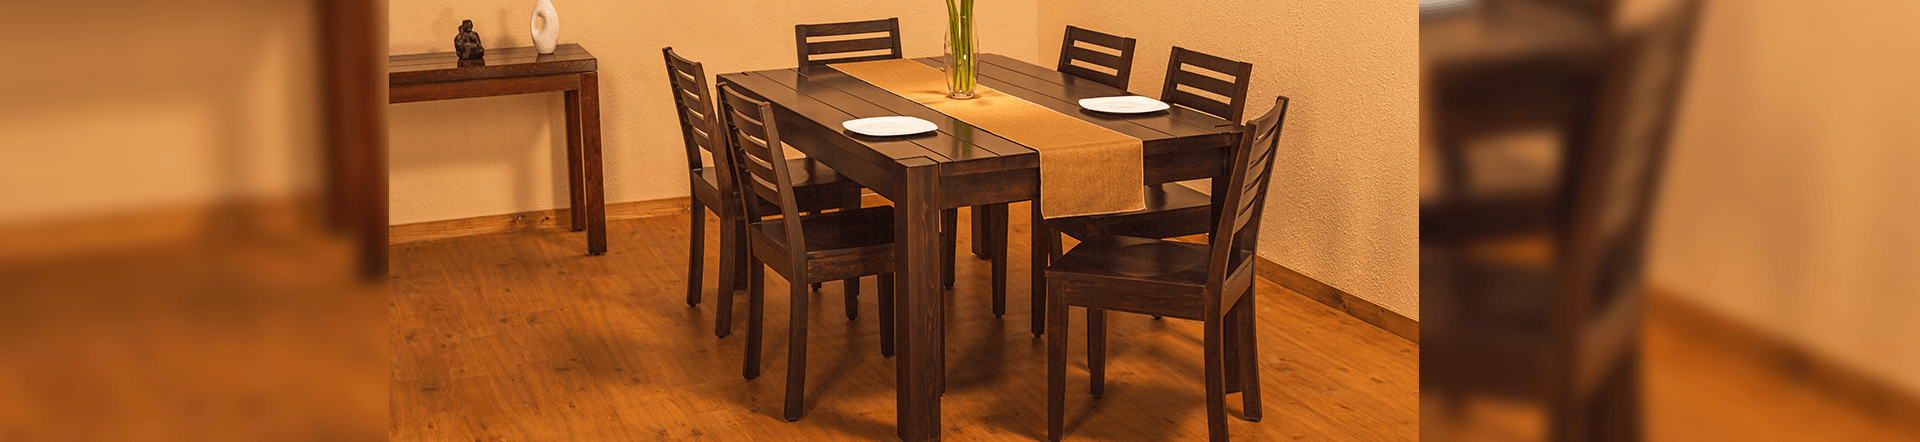 Dining Table And Chairs Made in Western Hemlock, Stained To A Walnut Finish